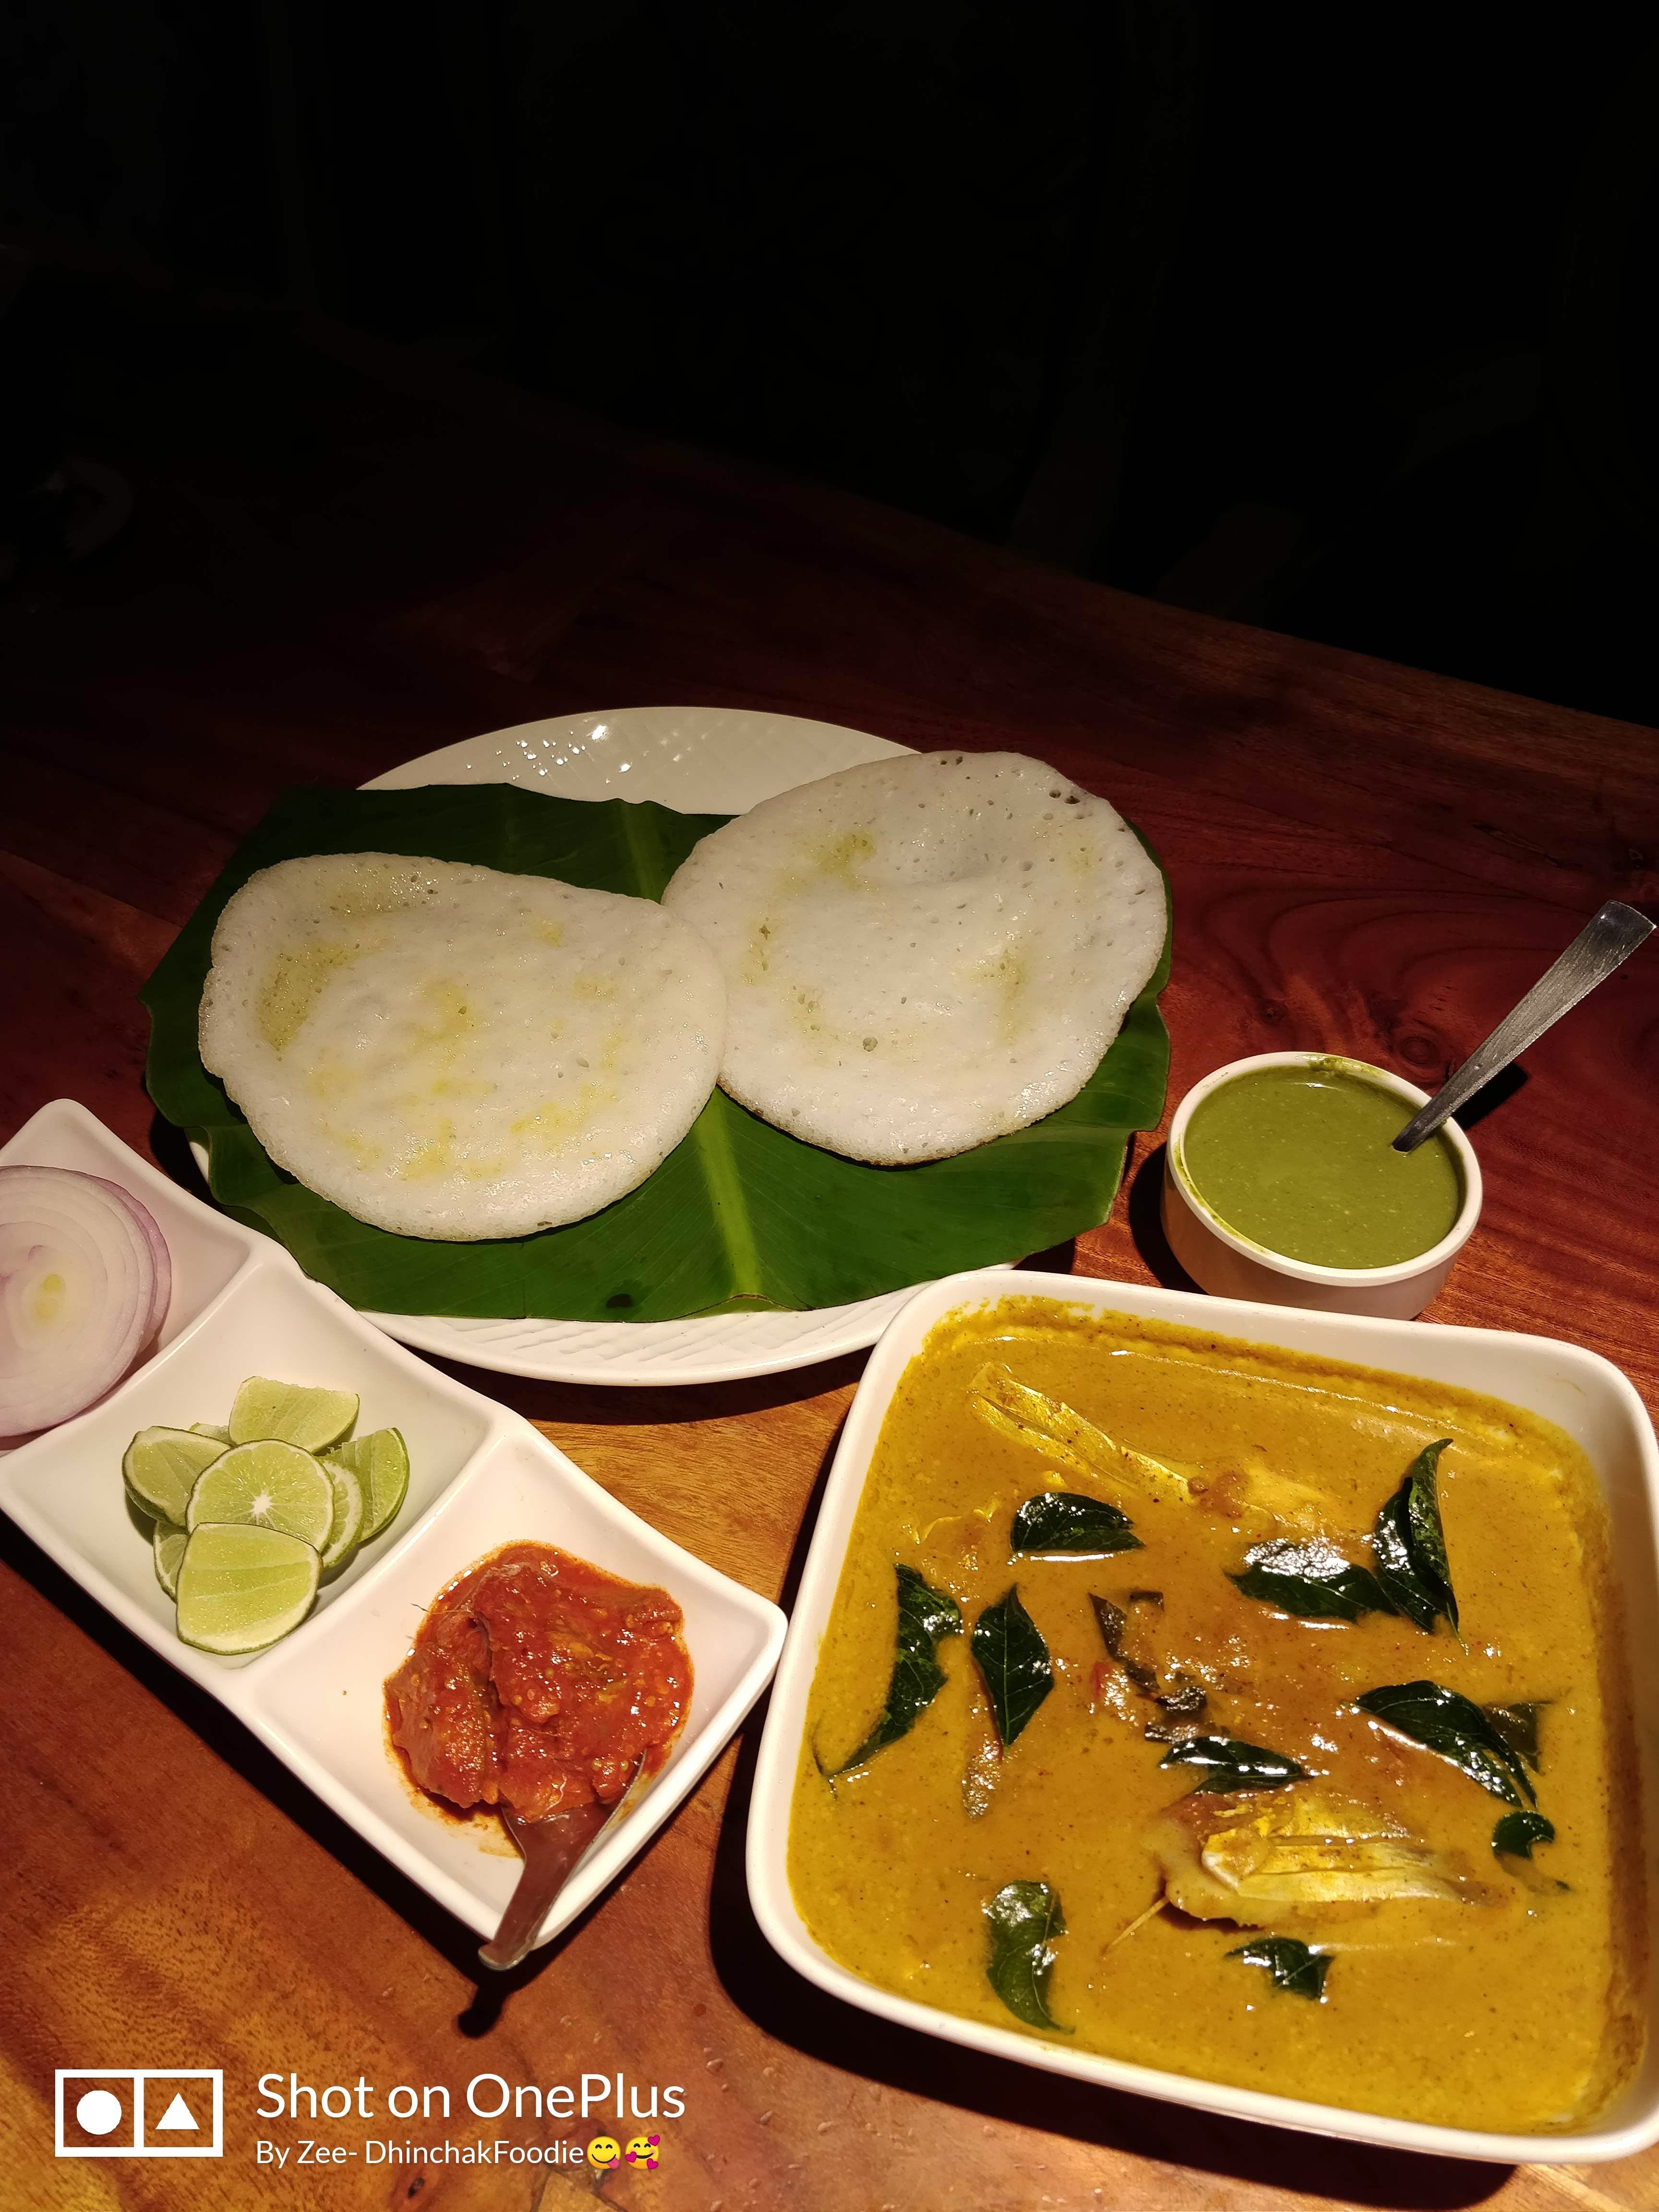 Dish,Food,Cuisine,Ingredient,Meal,Curry,Indian cuisine,Produce,Lunch,Kadhi